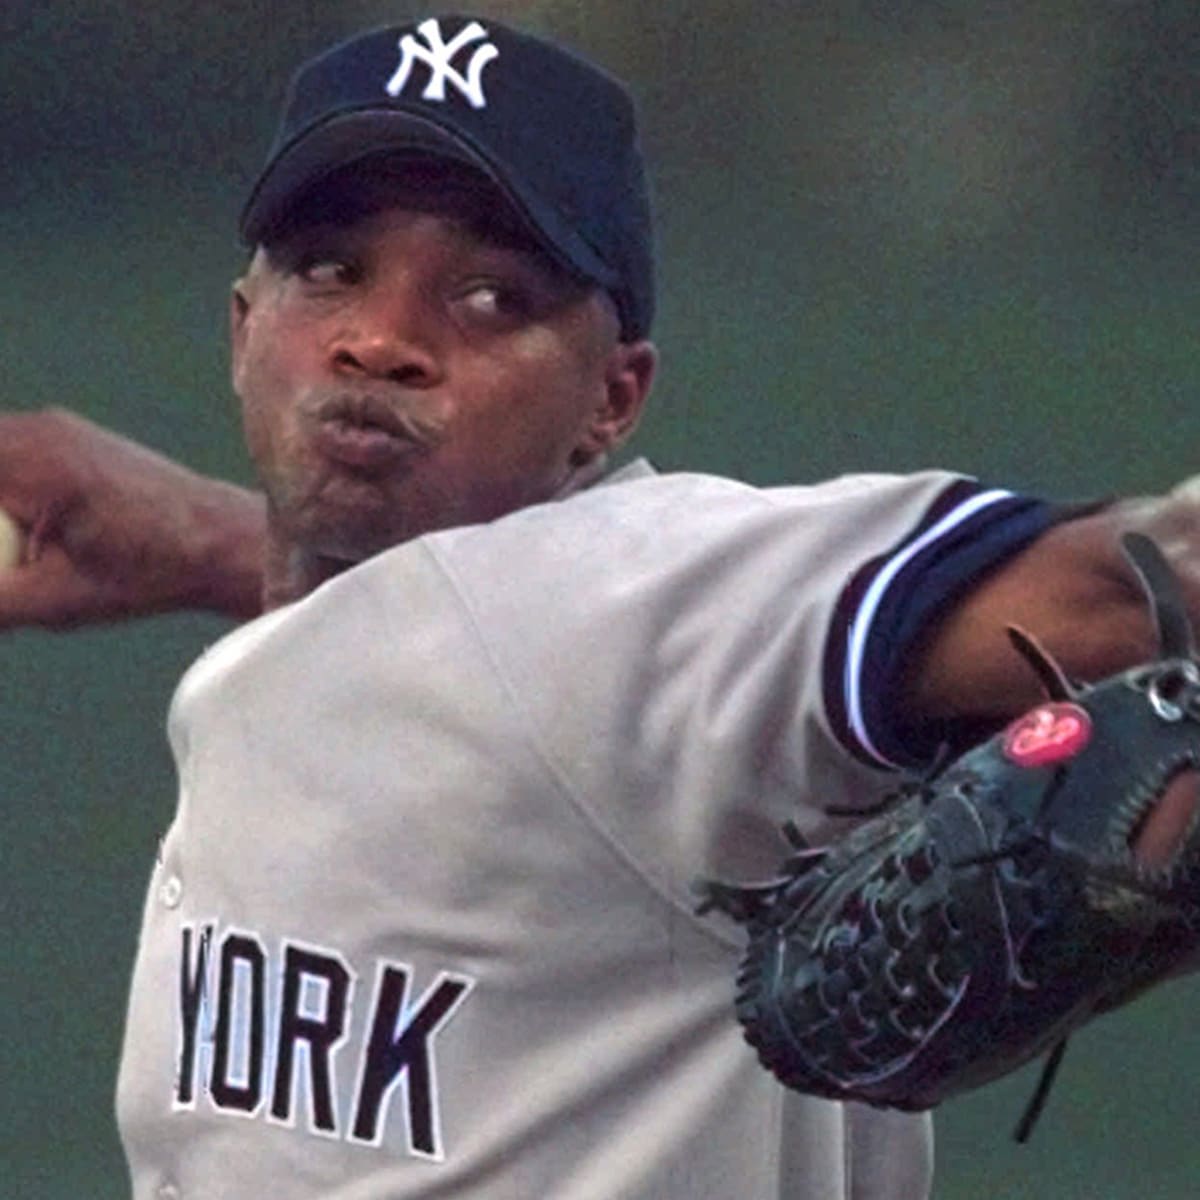 1998 Yankees Book: How El Duque's Arrival Saved the Season - The